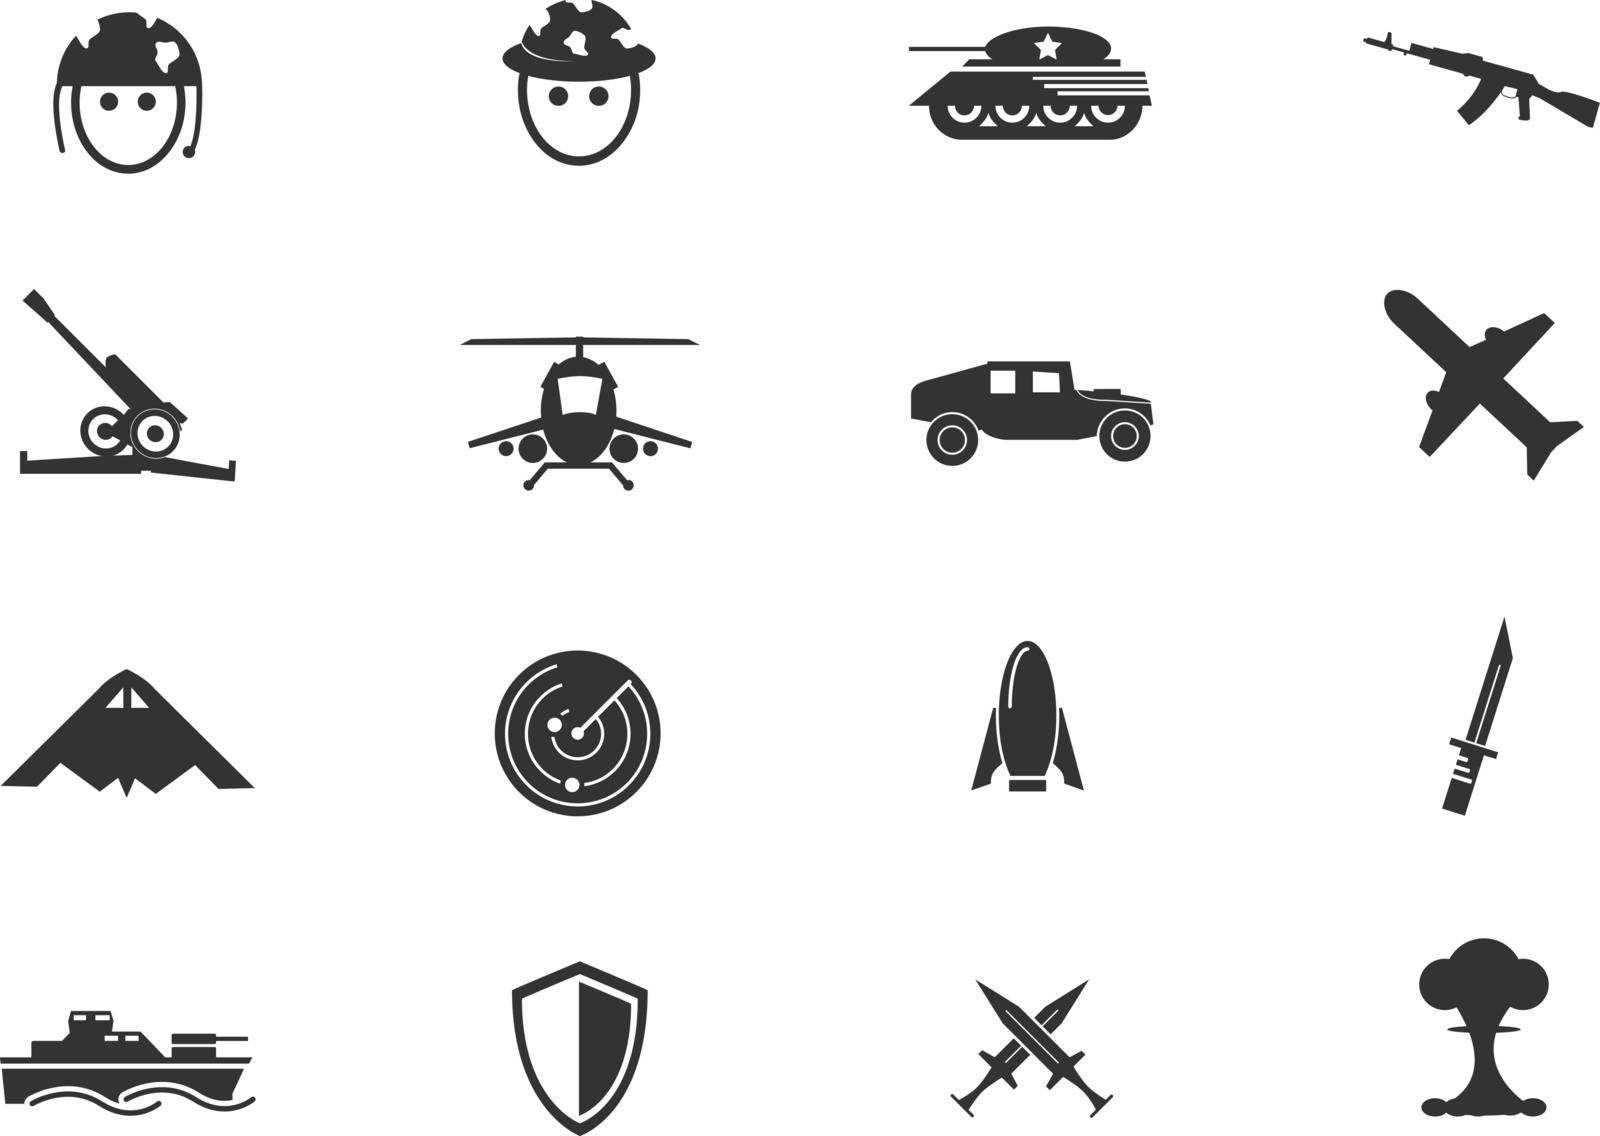 Military and war icons by ayax